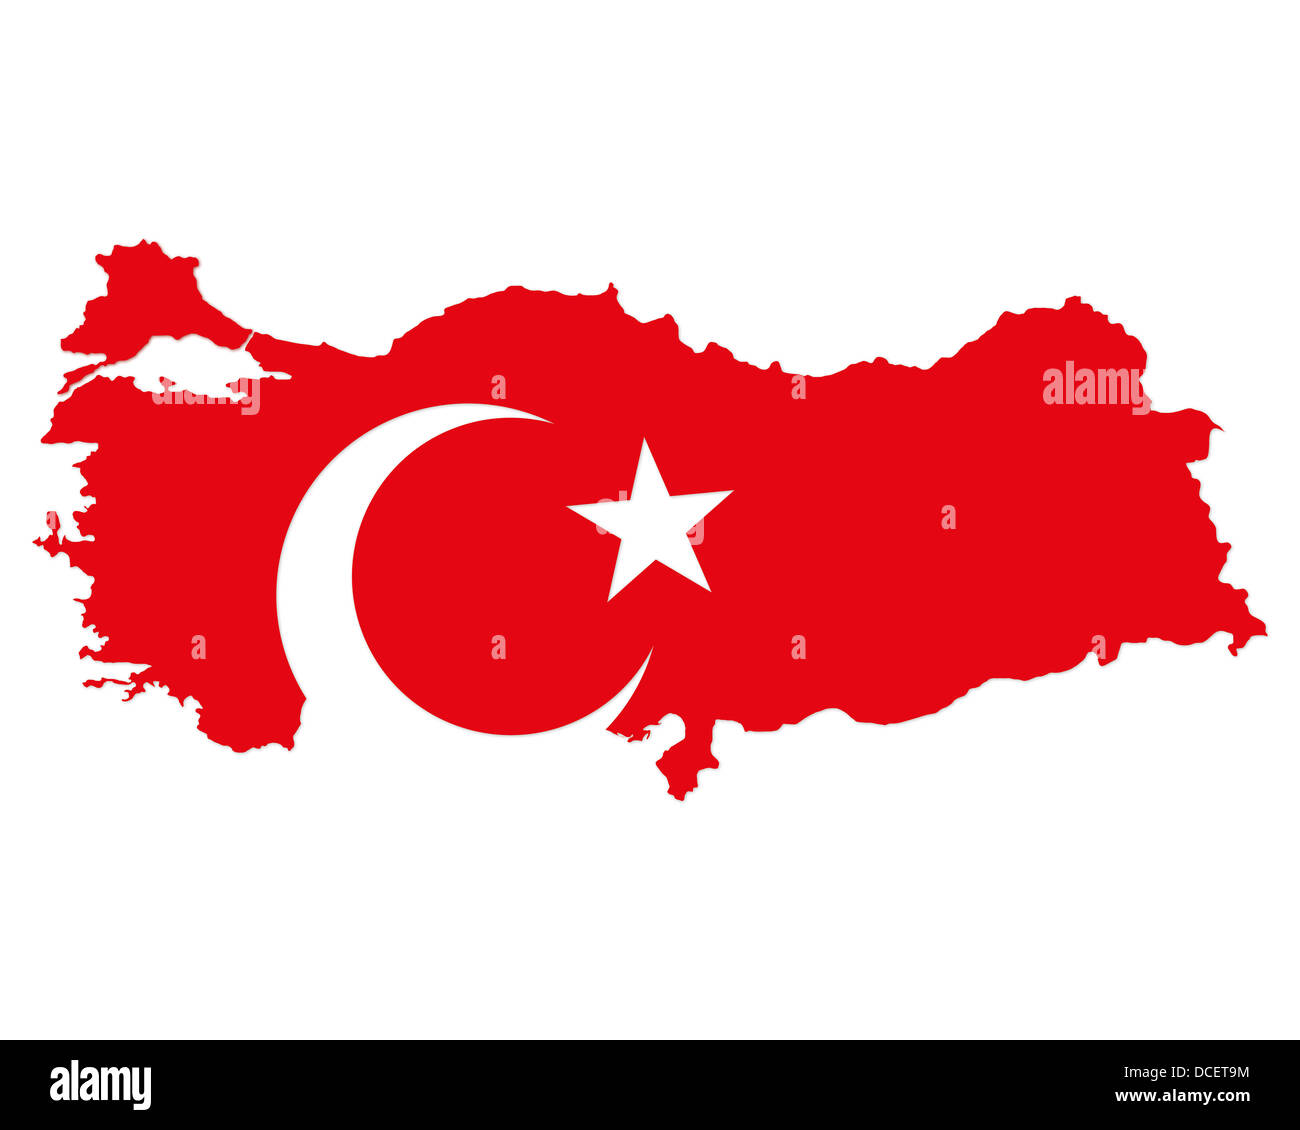 map and flag of Turkey on white background Stock Photo